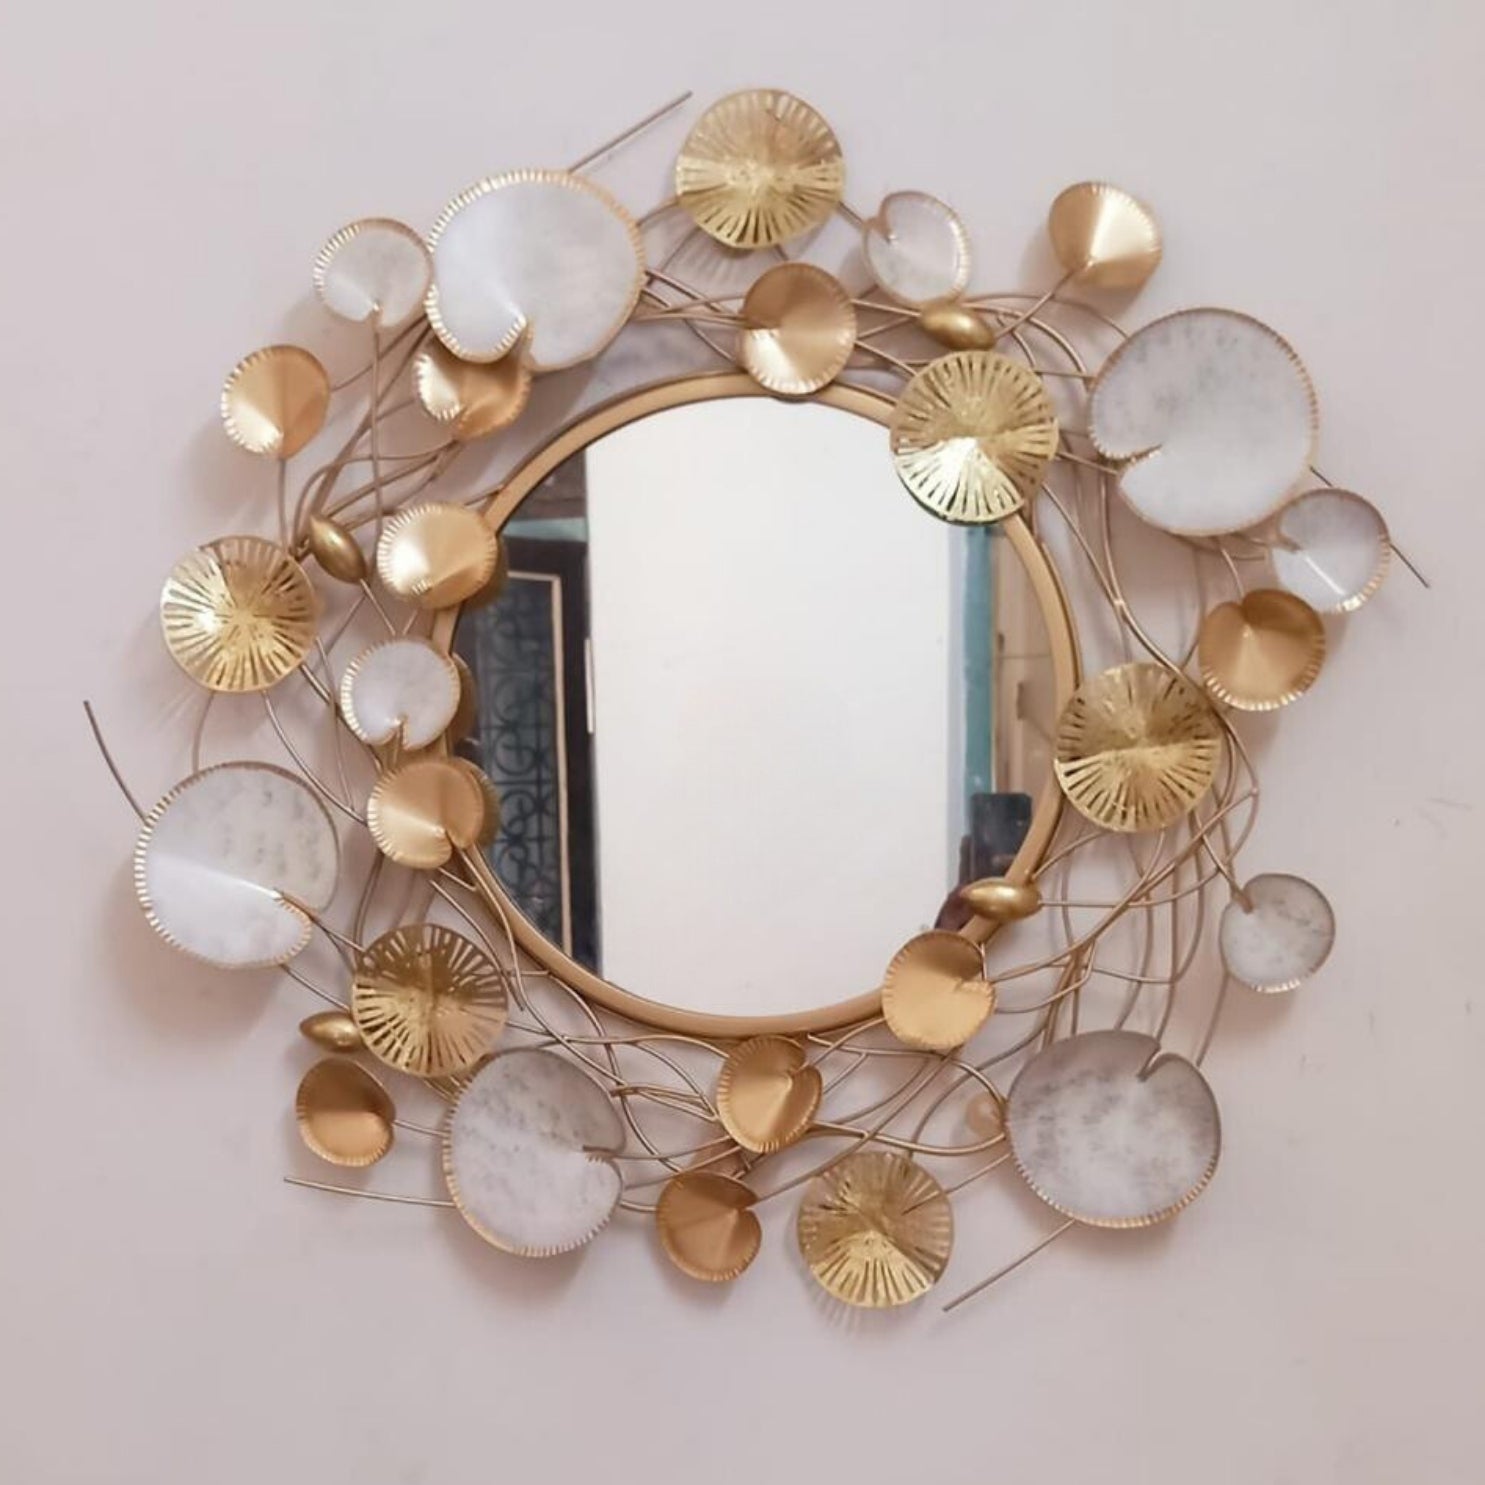 GOLD AND WHITE METAL FRAME ROUND WALL MIRROR